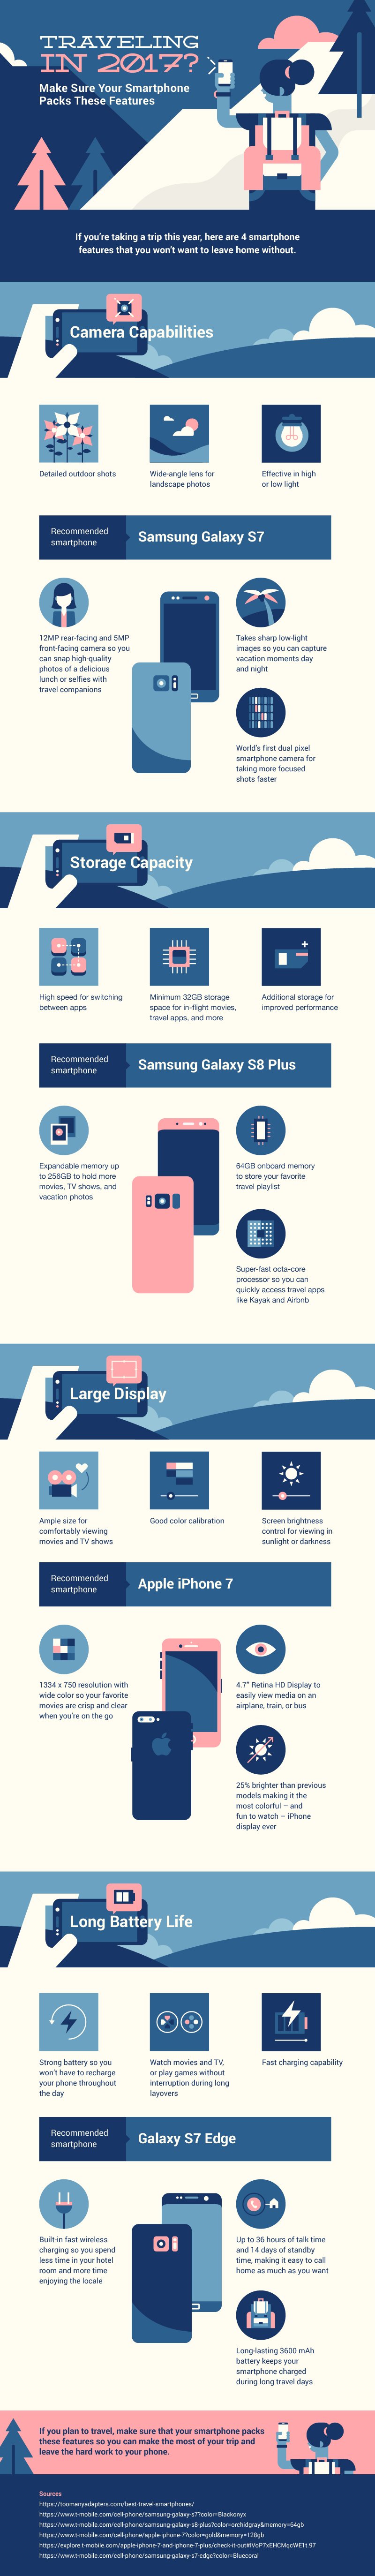 Traveling in 2017 - Make Sure Your Smartphone Pack These Features - travel in 2017, travel, smartphone, infographic